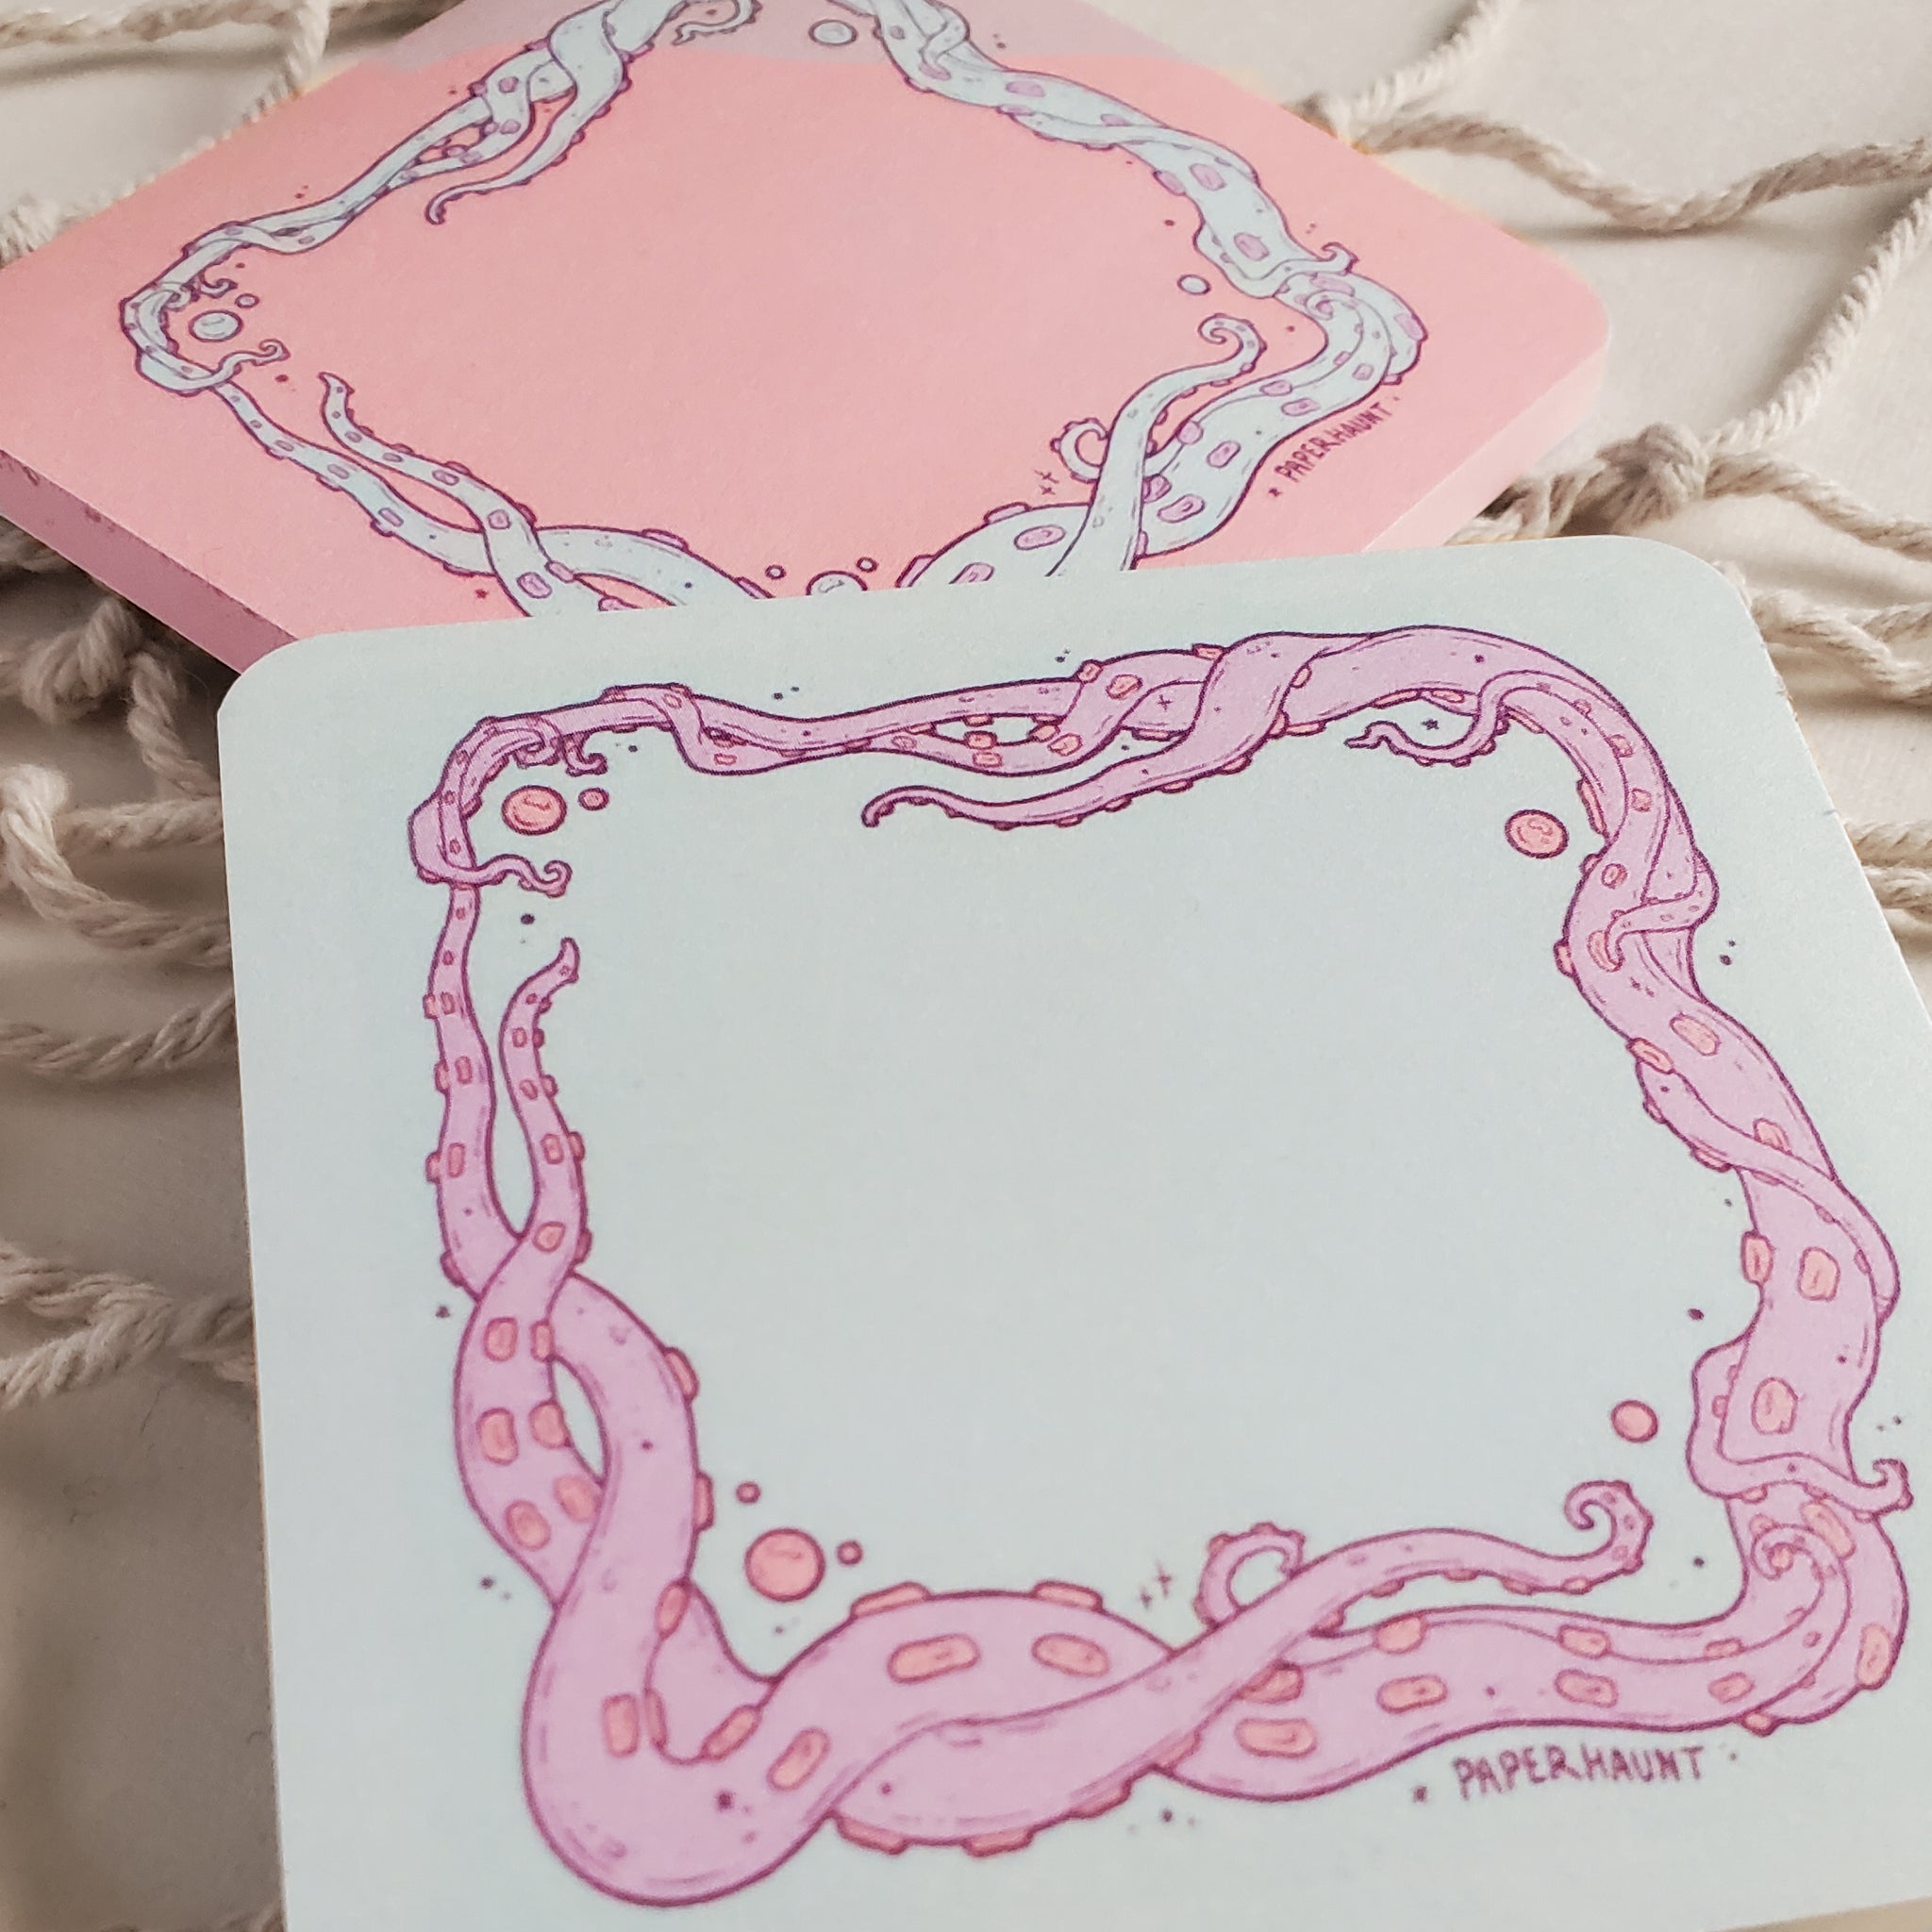 Tentacle Sticky Notes - Pastel